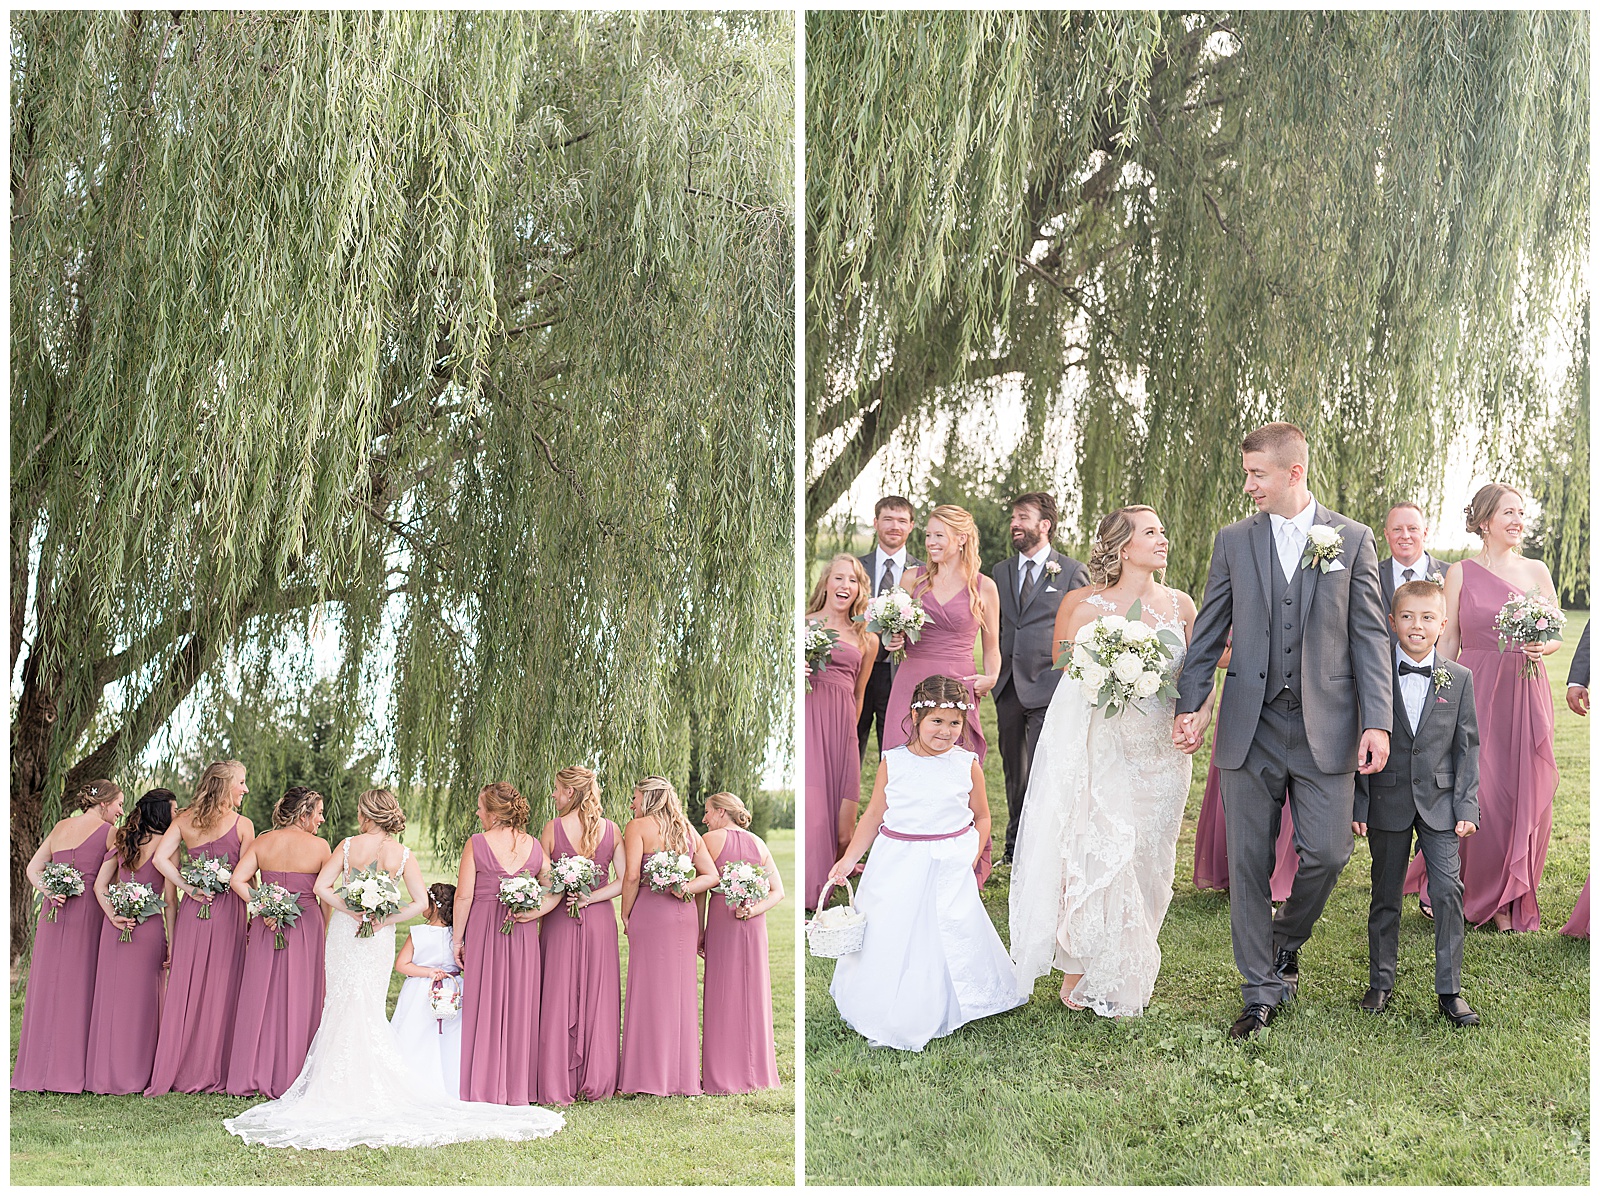 the bride is in the center with the flower girl to her right and four bridesmaids on either side of them with everyone's back to the camera and everyone's arms criss-cross around their backs while holding their flower bouquets and looking towards the bride while standing under the willow tree at Lakefield Weddings in Manheim, PA, the bride and groom and facing each other while smiling and walking toward the camera with the bride on the left and the flower girl beside her and the groom on the right and their bridal party scattered behind them and looking in different directions while standing her the willow tree at Lakefield Weddings in Manheim, PA